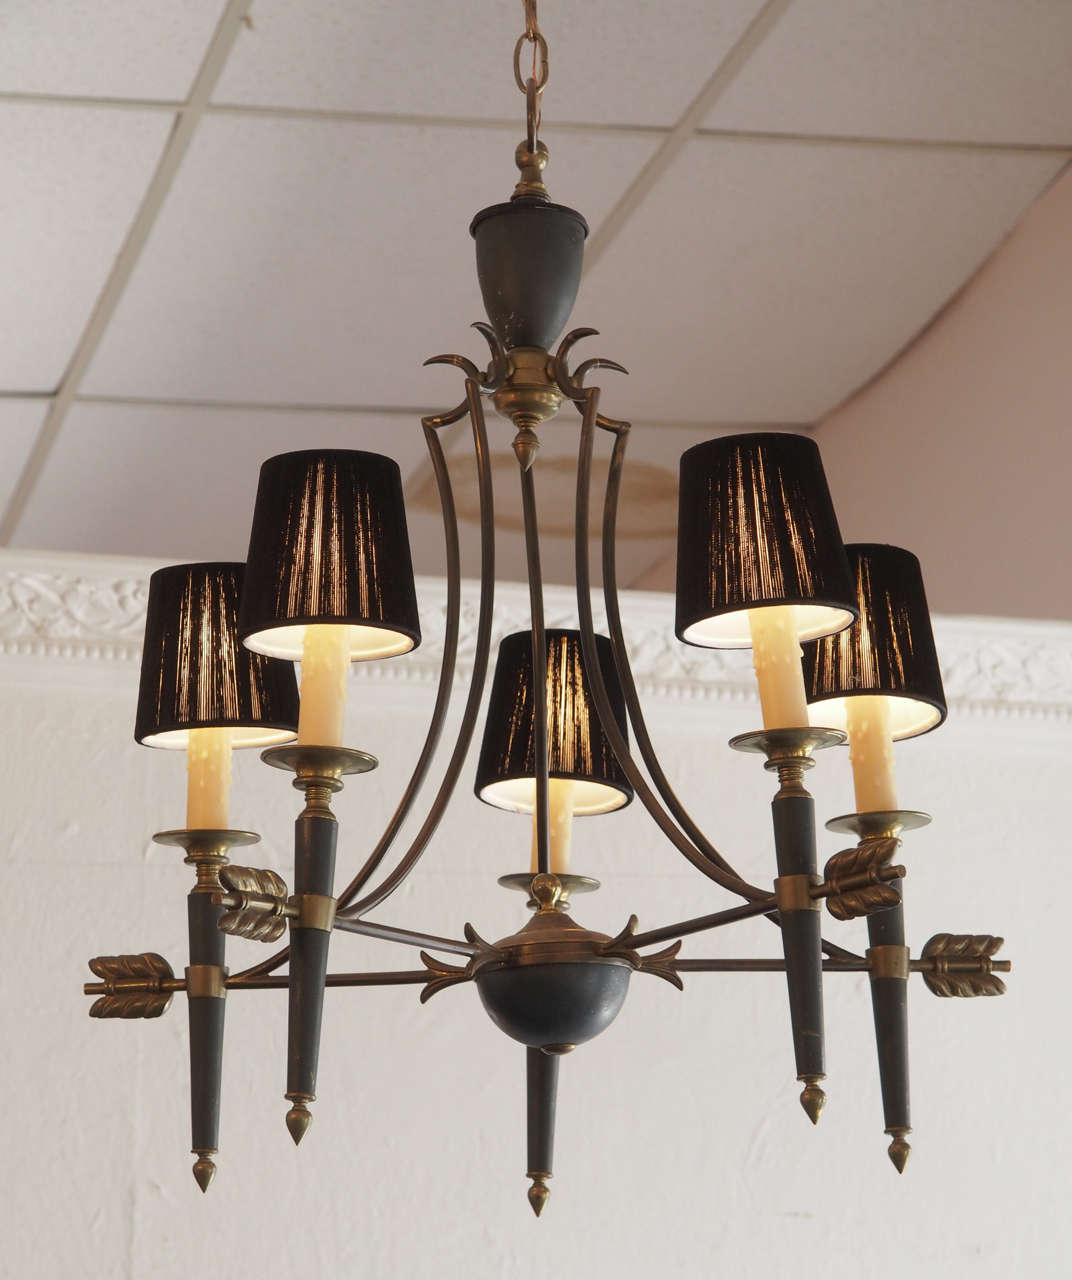 Elegantly simple bronze and patinated bronze Directoire style French chandelier, circa 1940. The five-candle like torches ending in beeswax sleeves surmounted with black translucent fabric shades are joined by bronze arrows to a lower central urn